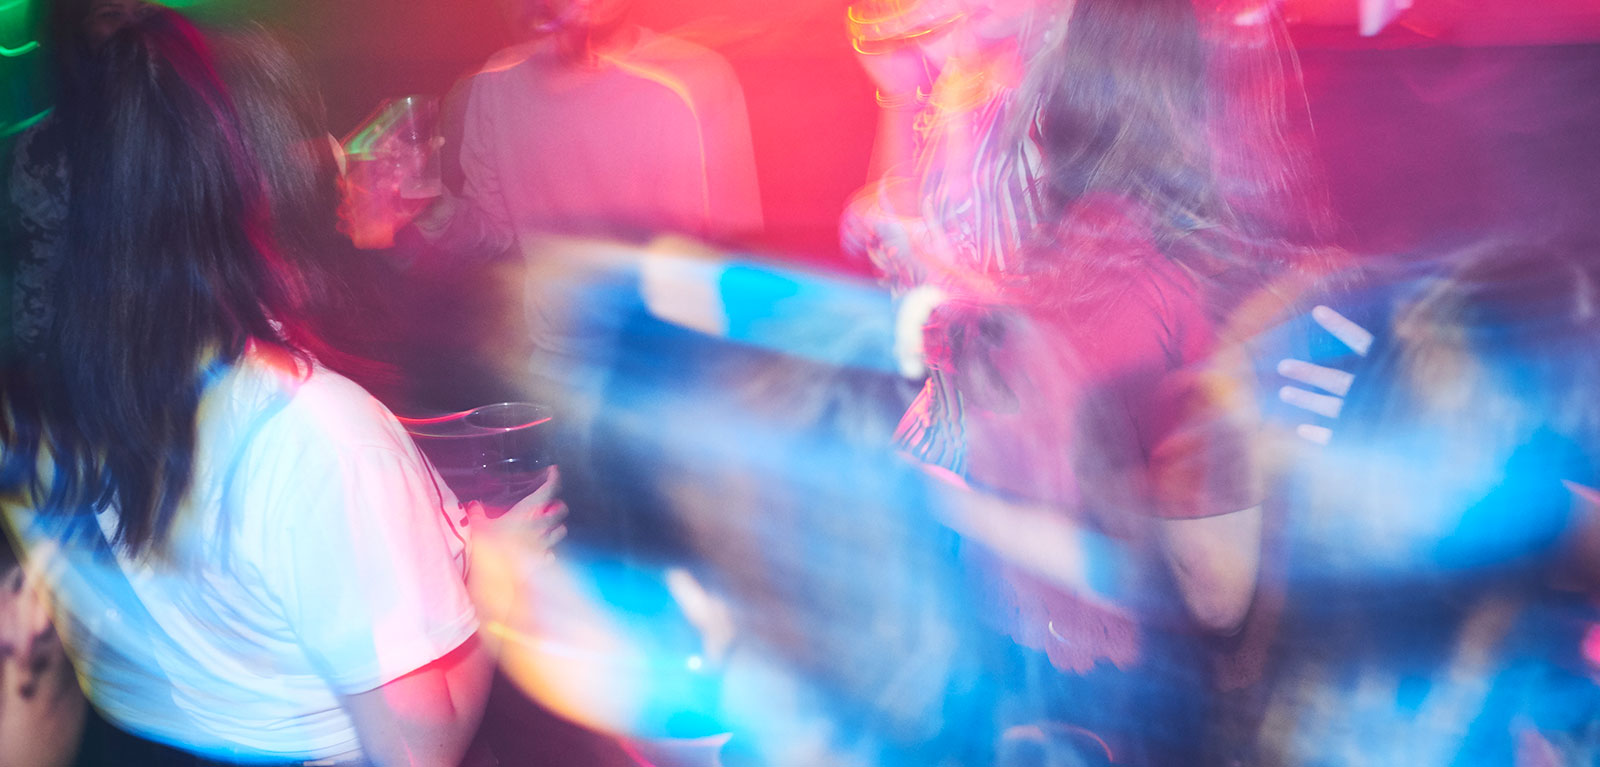 abstract image of students clubbing